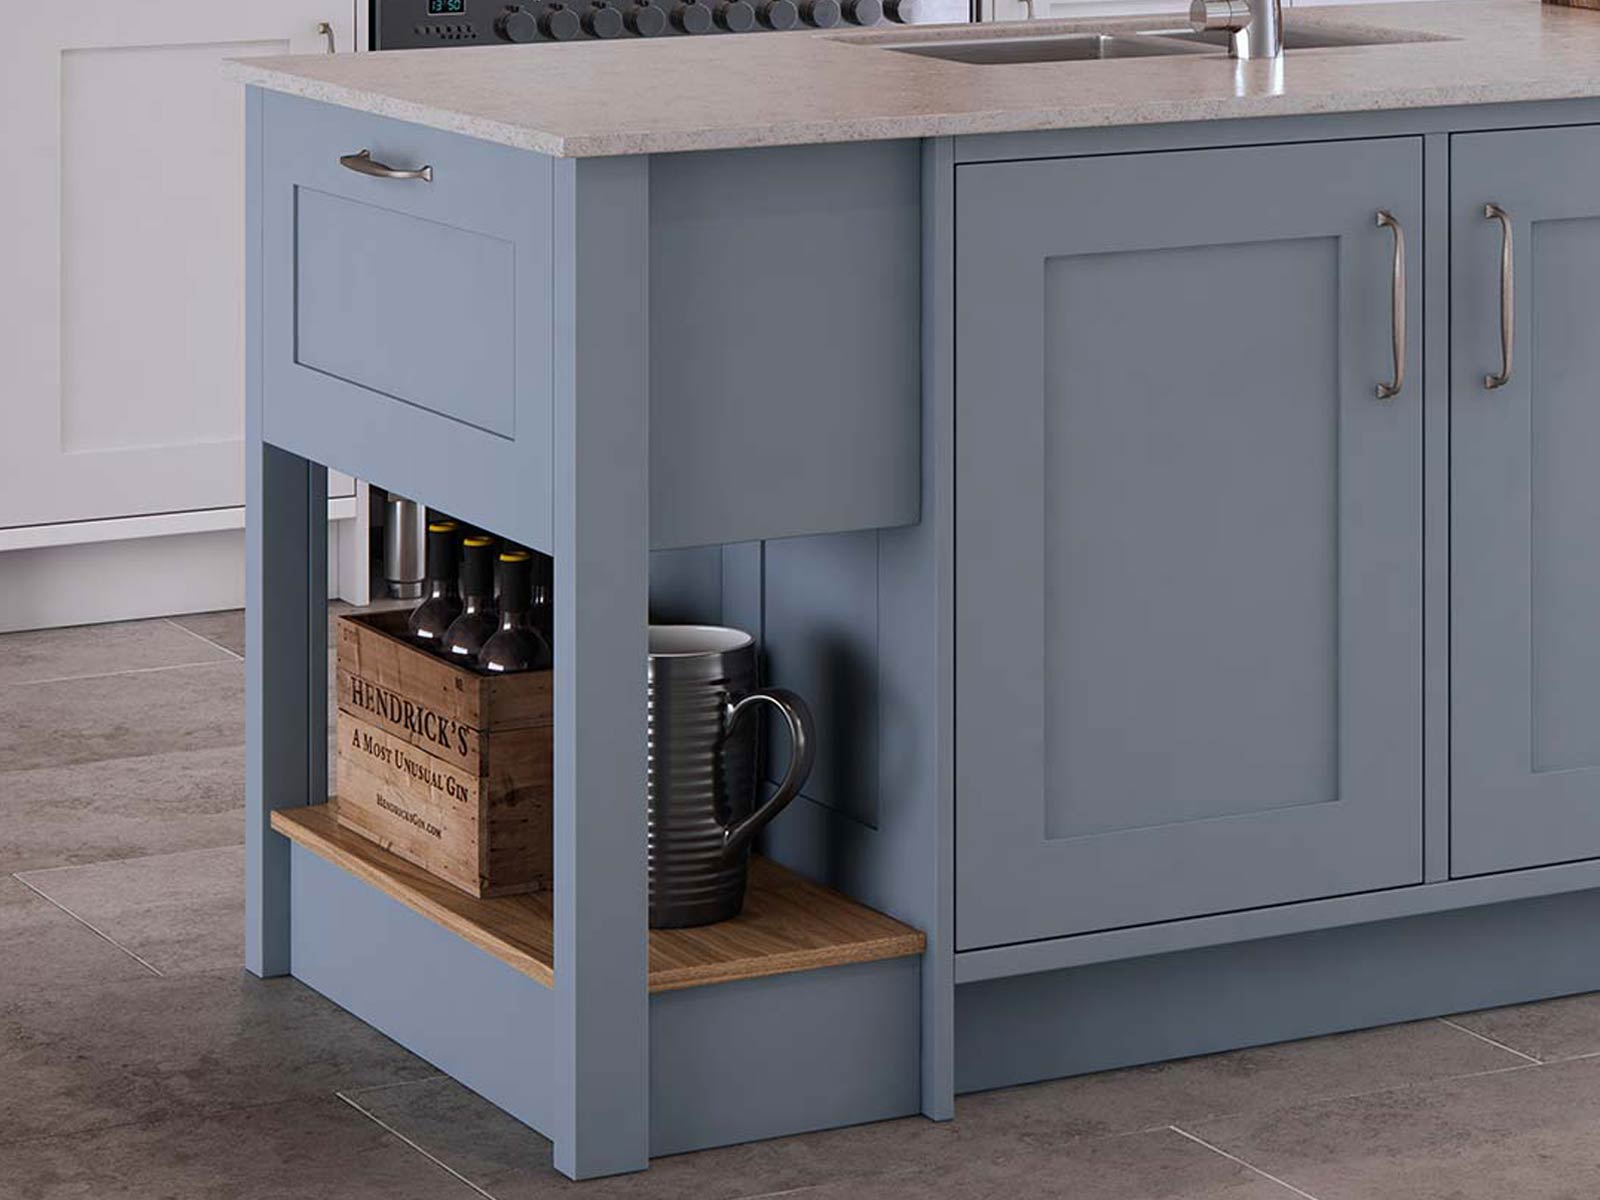 A baby blue kitchen island with sink and a chef’s table